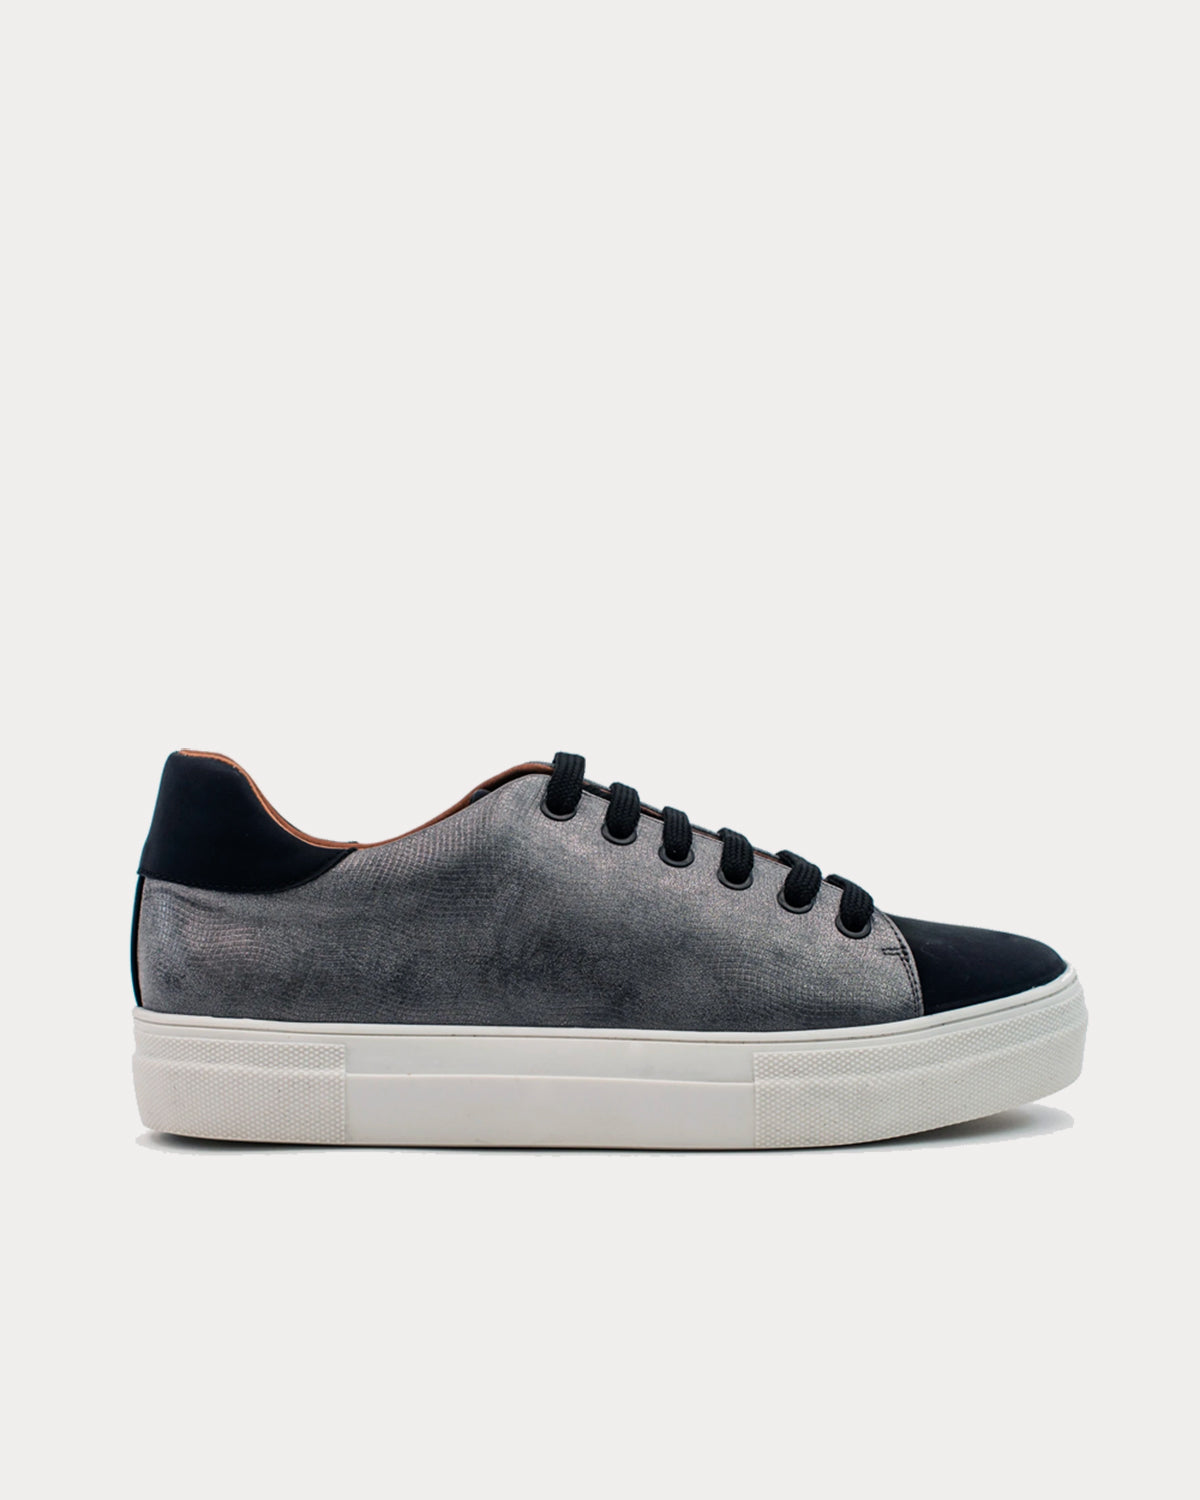 Allkind - Lucy Vegan Leather Lace Grey Low Top Sneakers